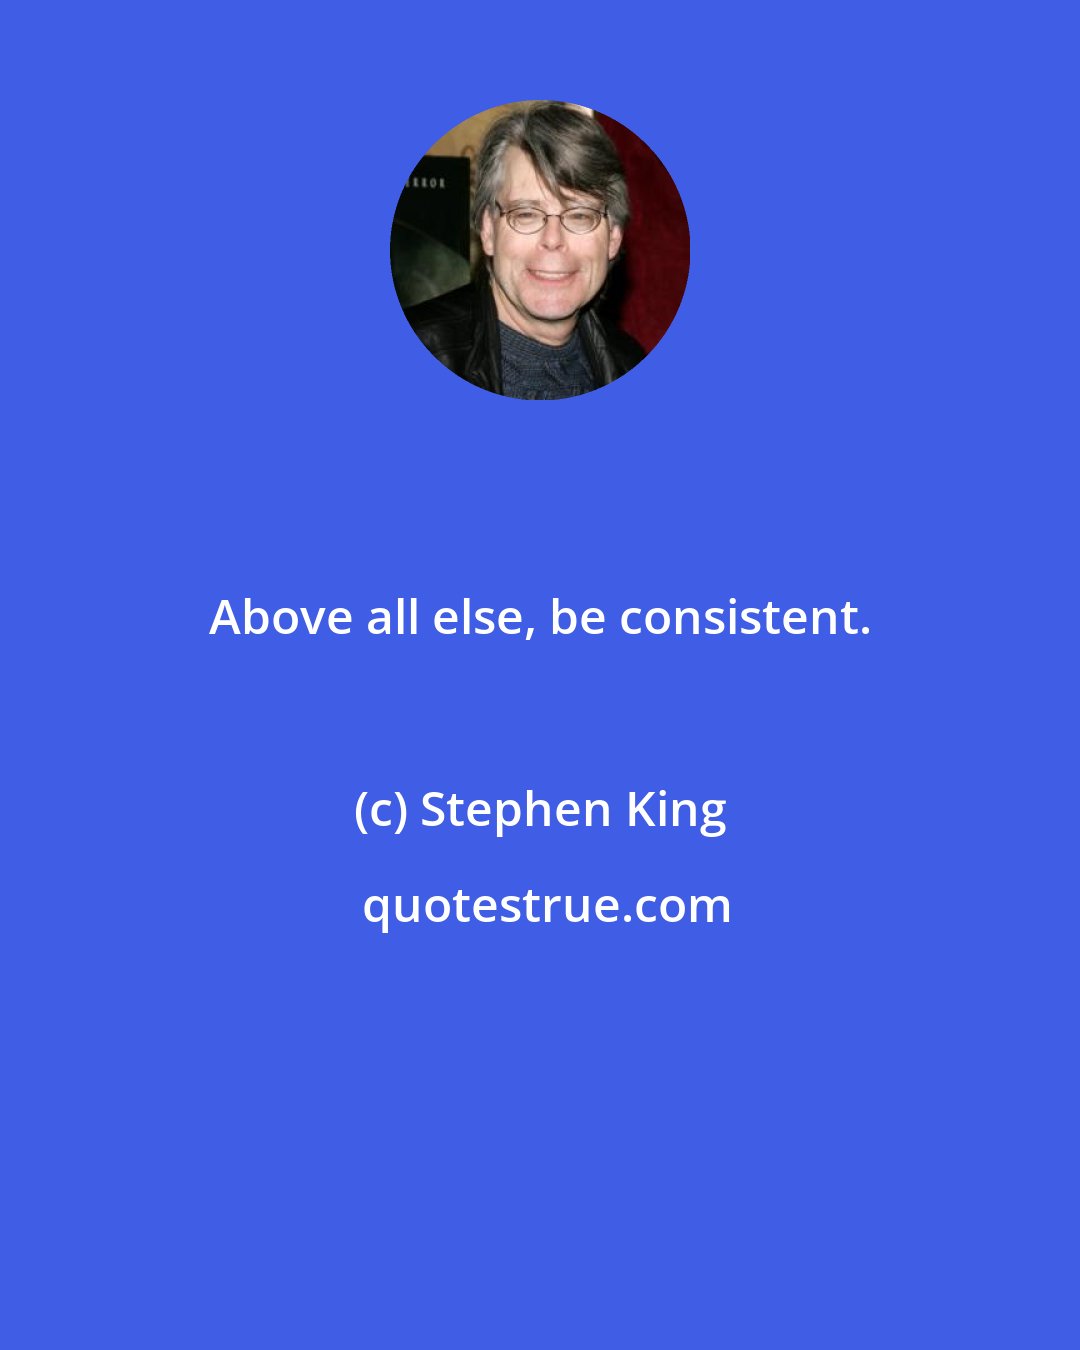 Stephen King: Above all else, be consistent.